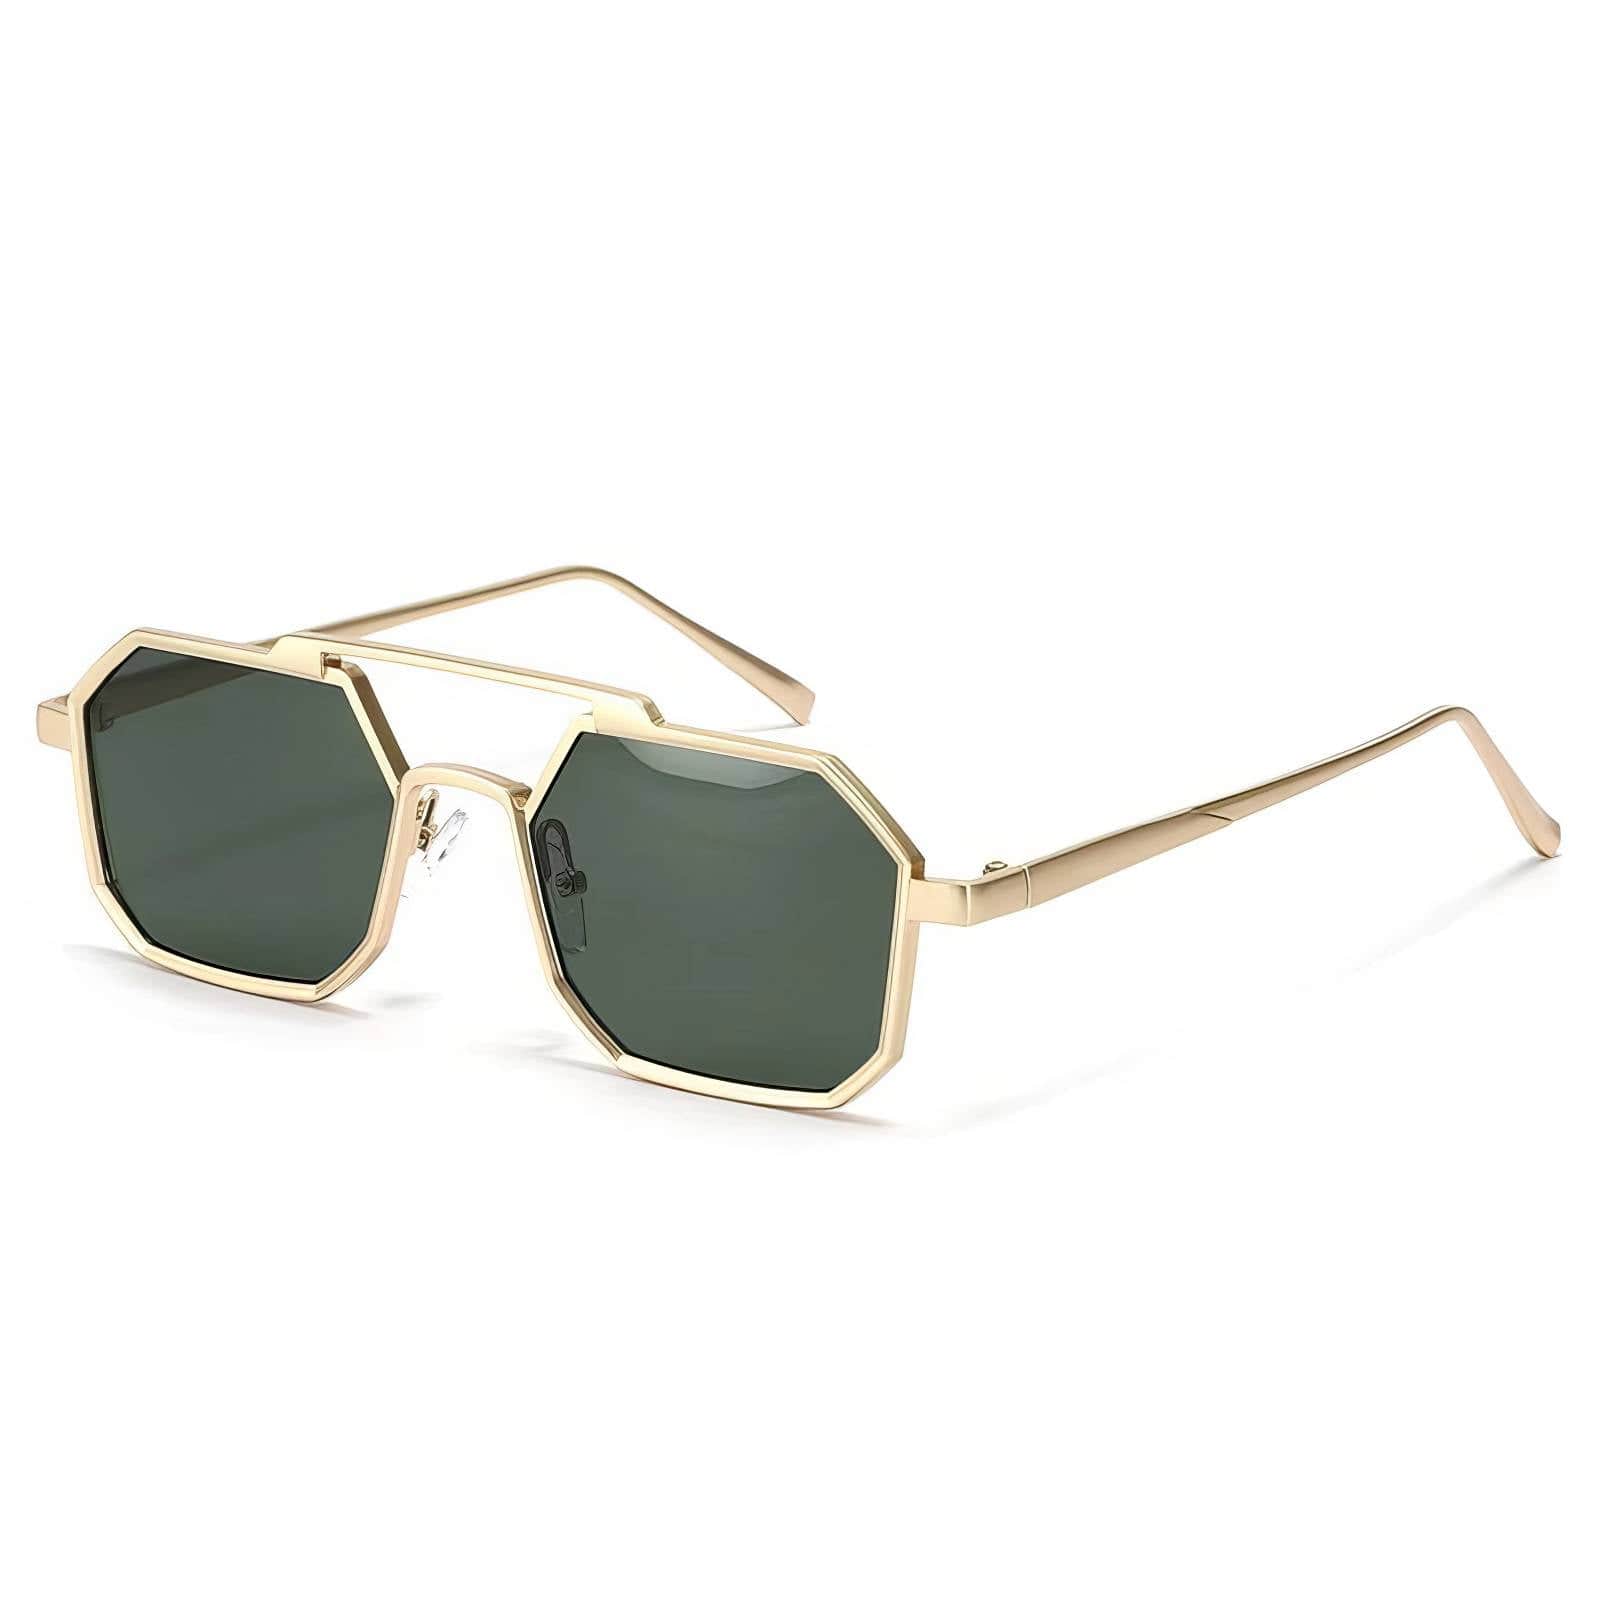 New Square Double Beam Sunglasses Green / Resin